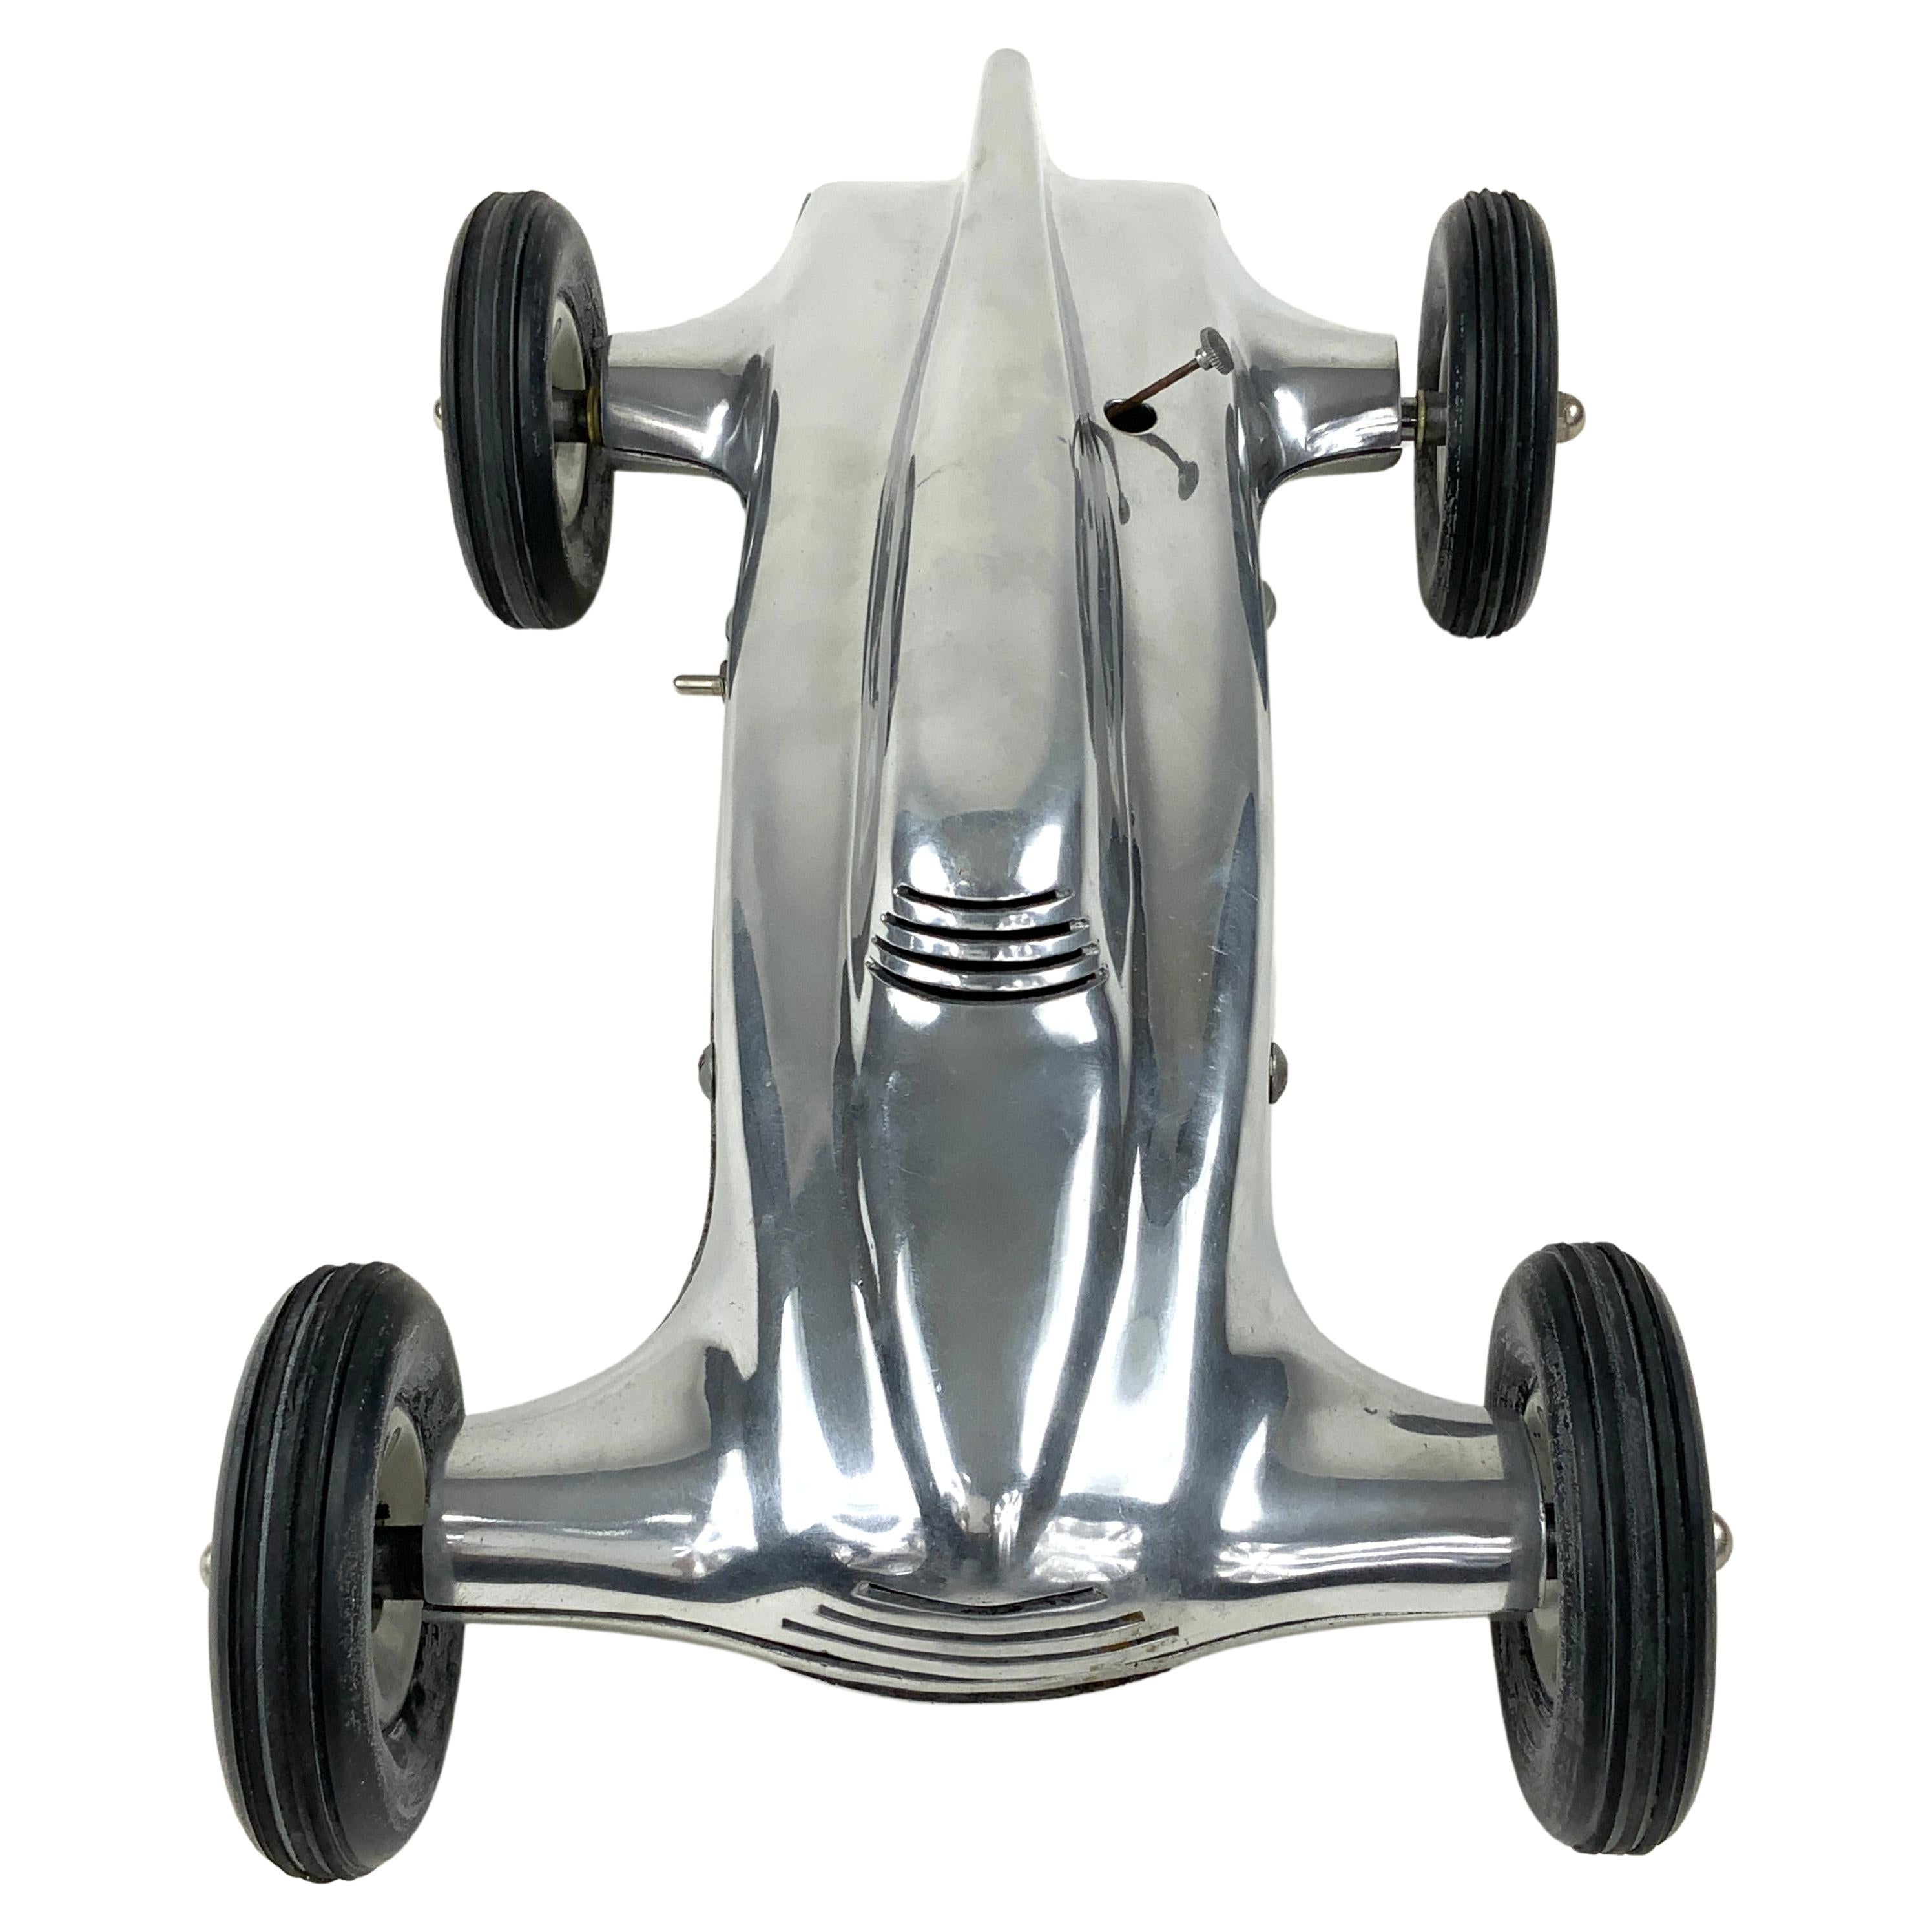 This original 1940 Rexner Zipper Tether Car Racer with its streamlined design is in excellent condition.  It is powered by a Super Cyclone .60 ignition engine which powers the car's rear wheels through spur gears. 

This car is complete with the